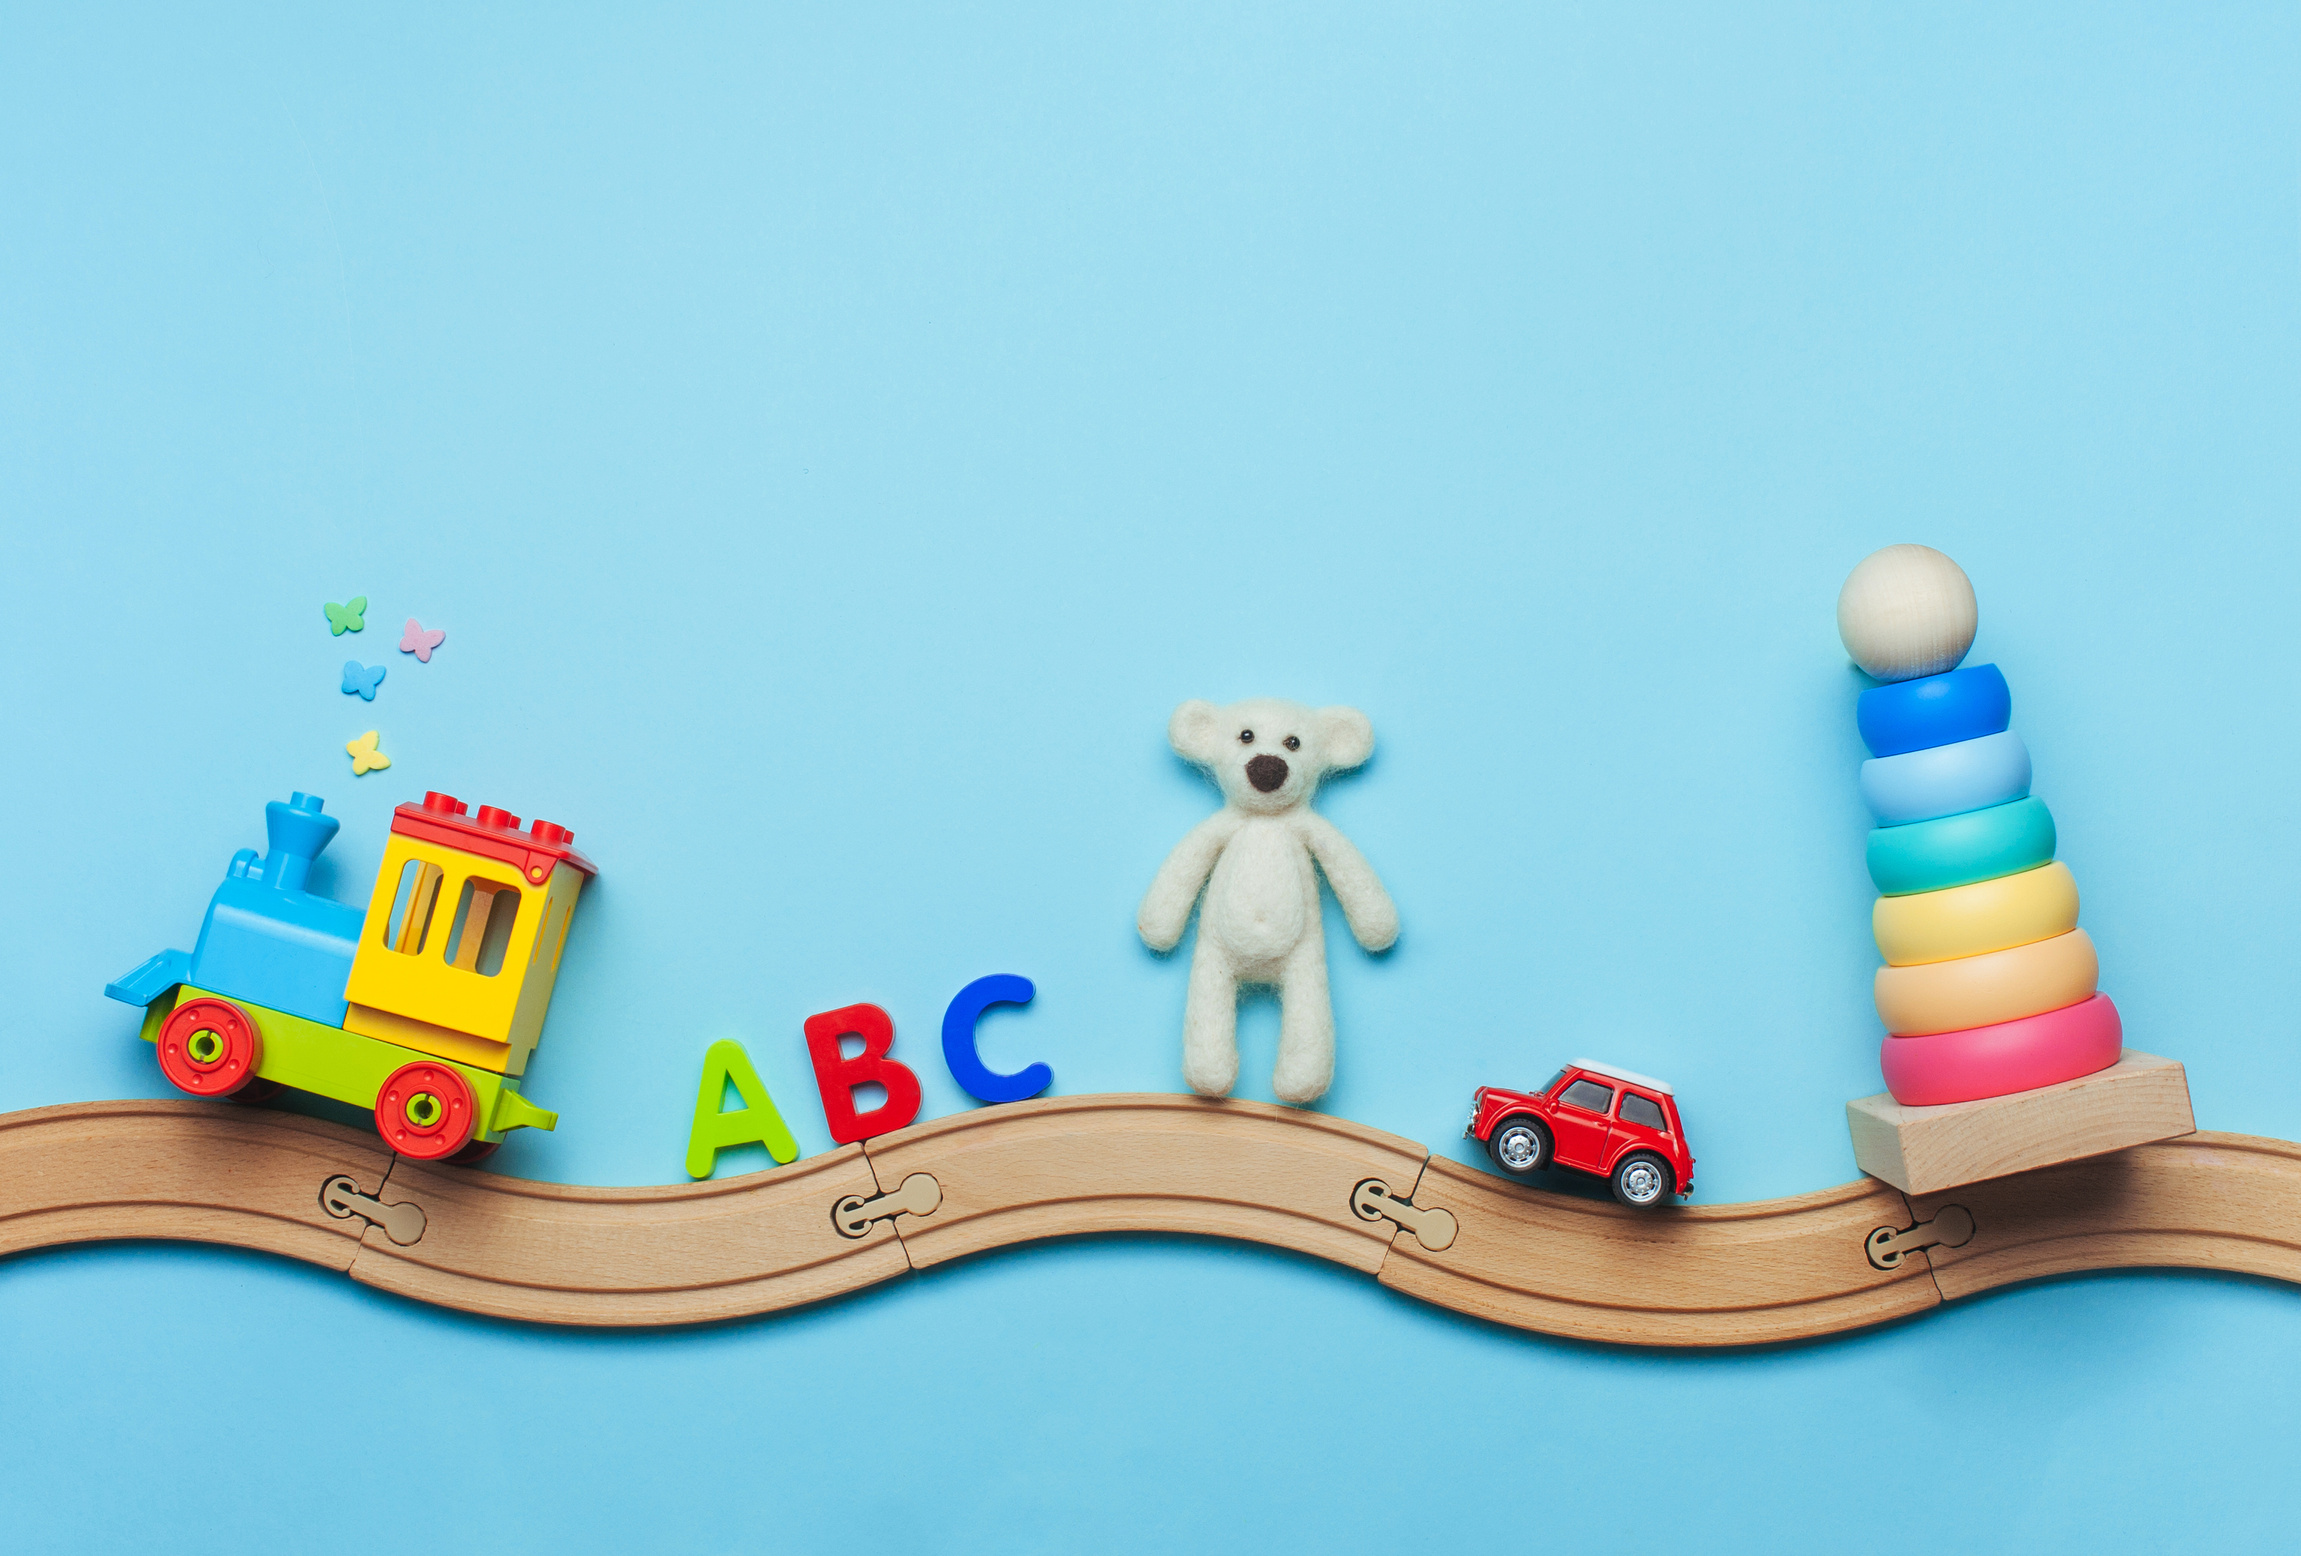 Kids toys on toy wooden railway on blue background